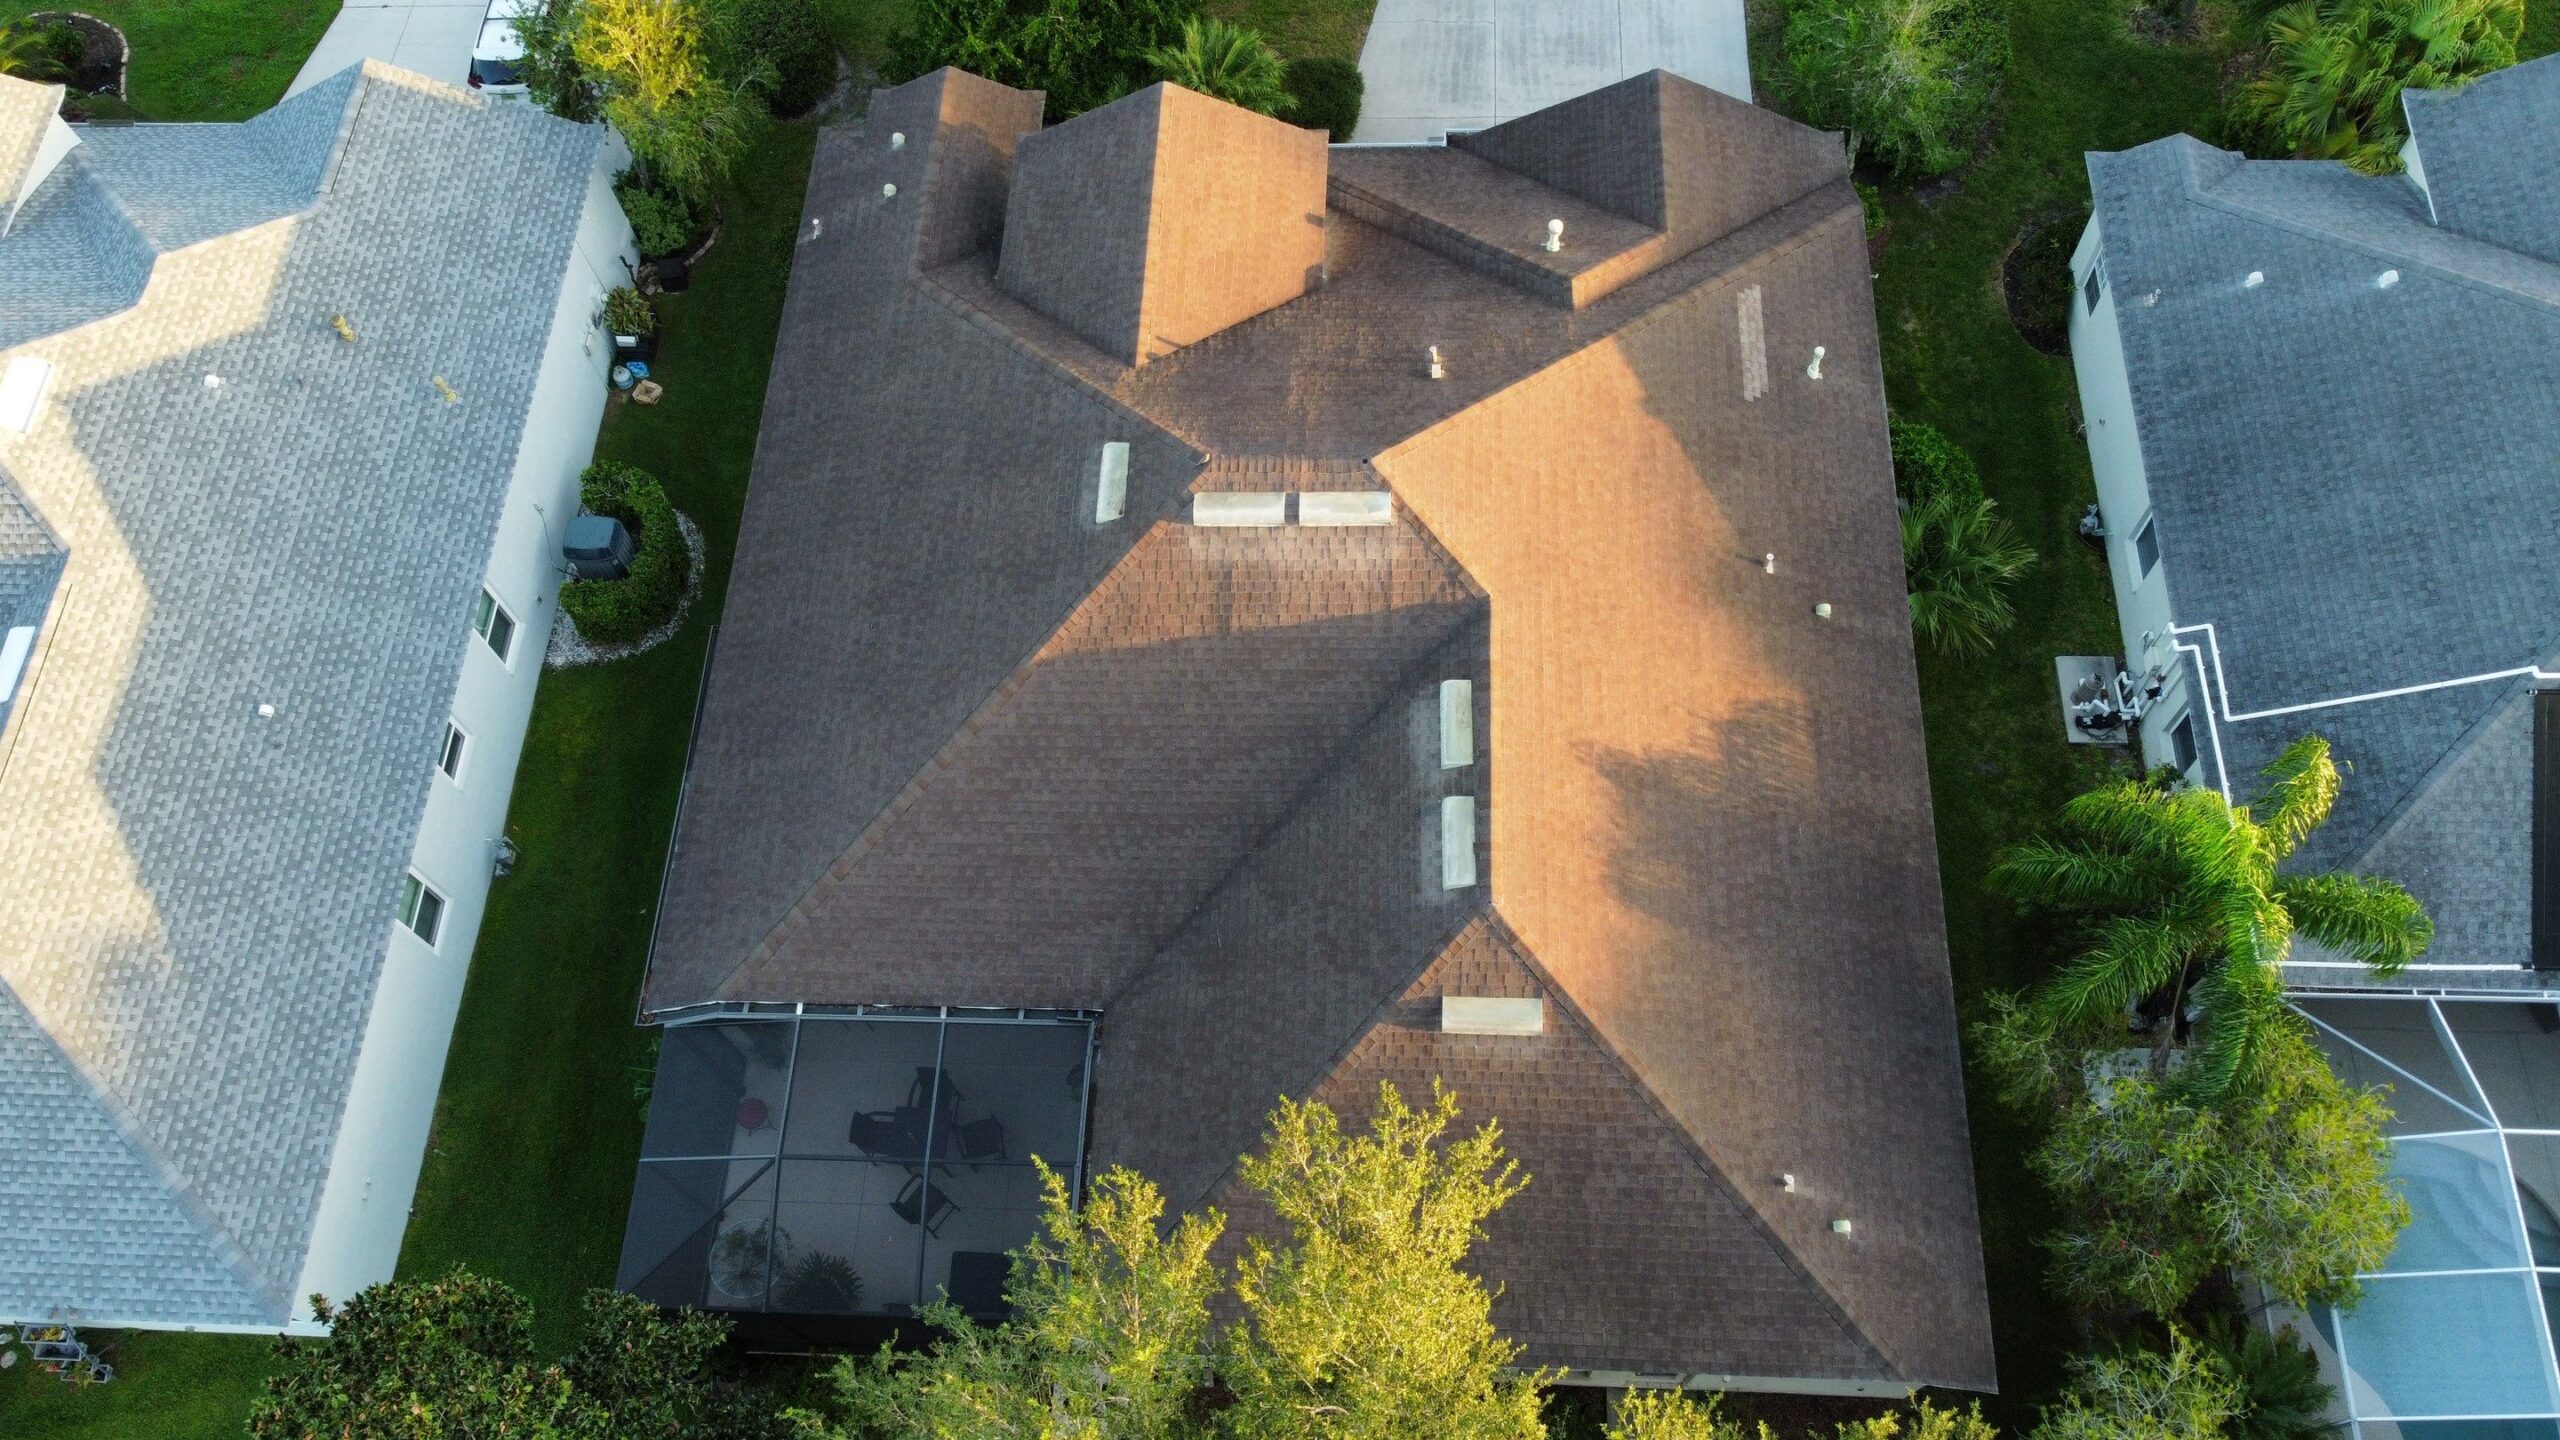 residential roof